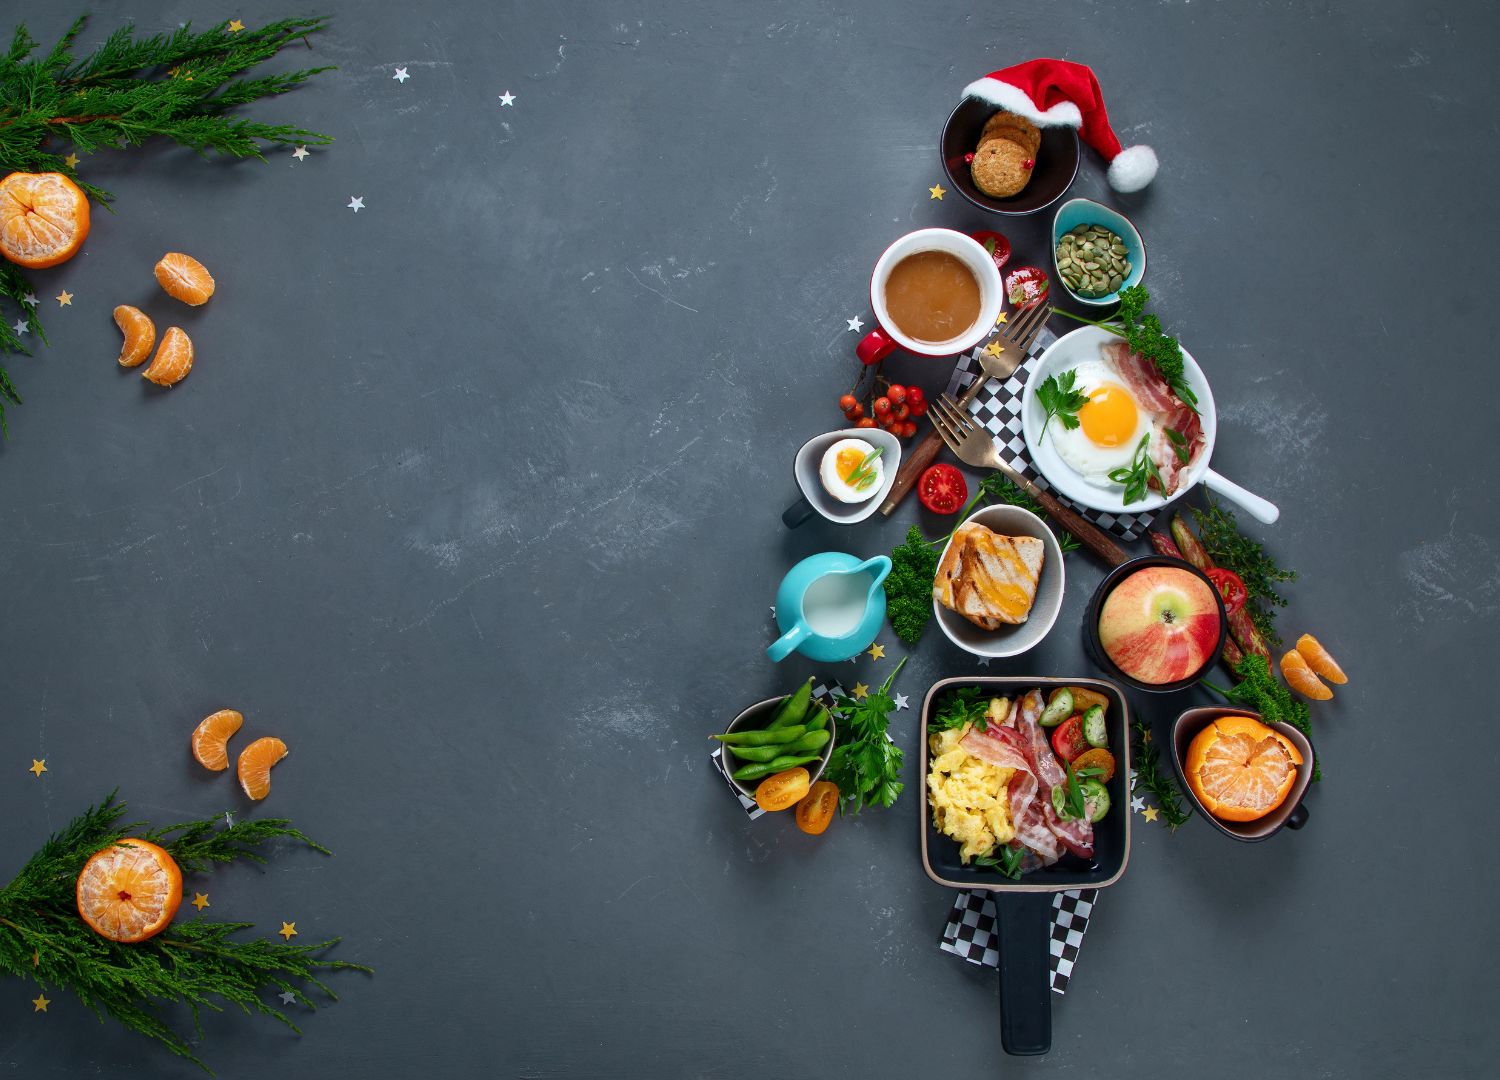 Healthy Meals for a Healthy Christmas